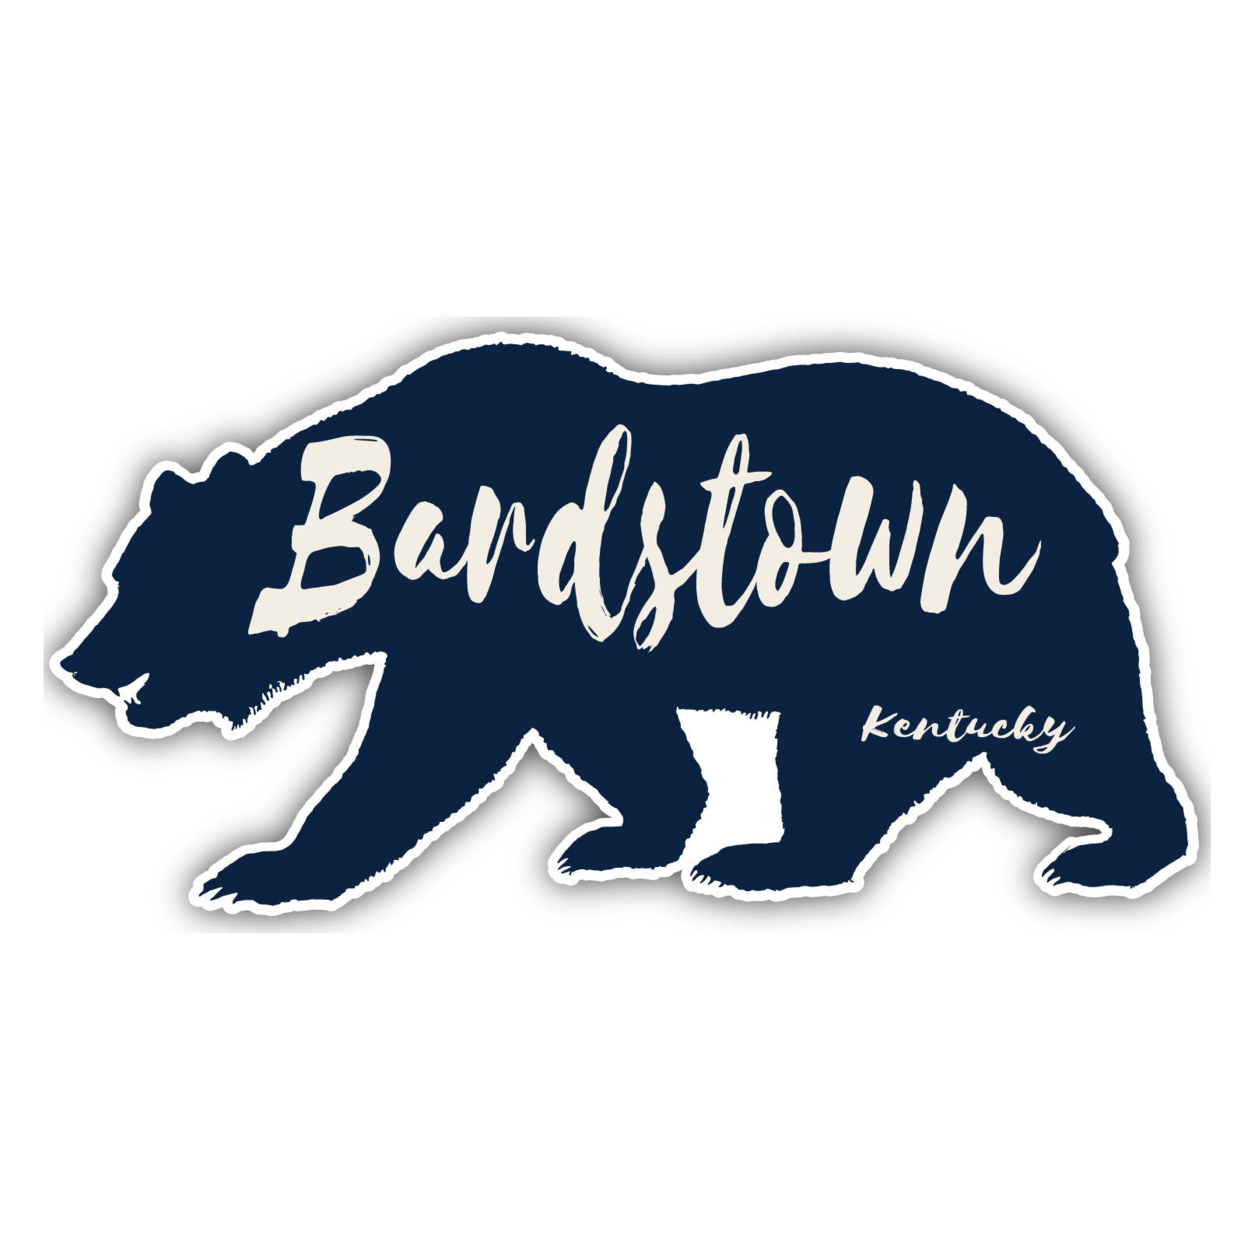 Bardstown Kentucky Souvenir Decorative Stickers (Choose Theme And Size) - 4-Pack, 12-Inch, Great Outdoors